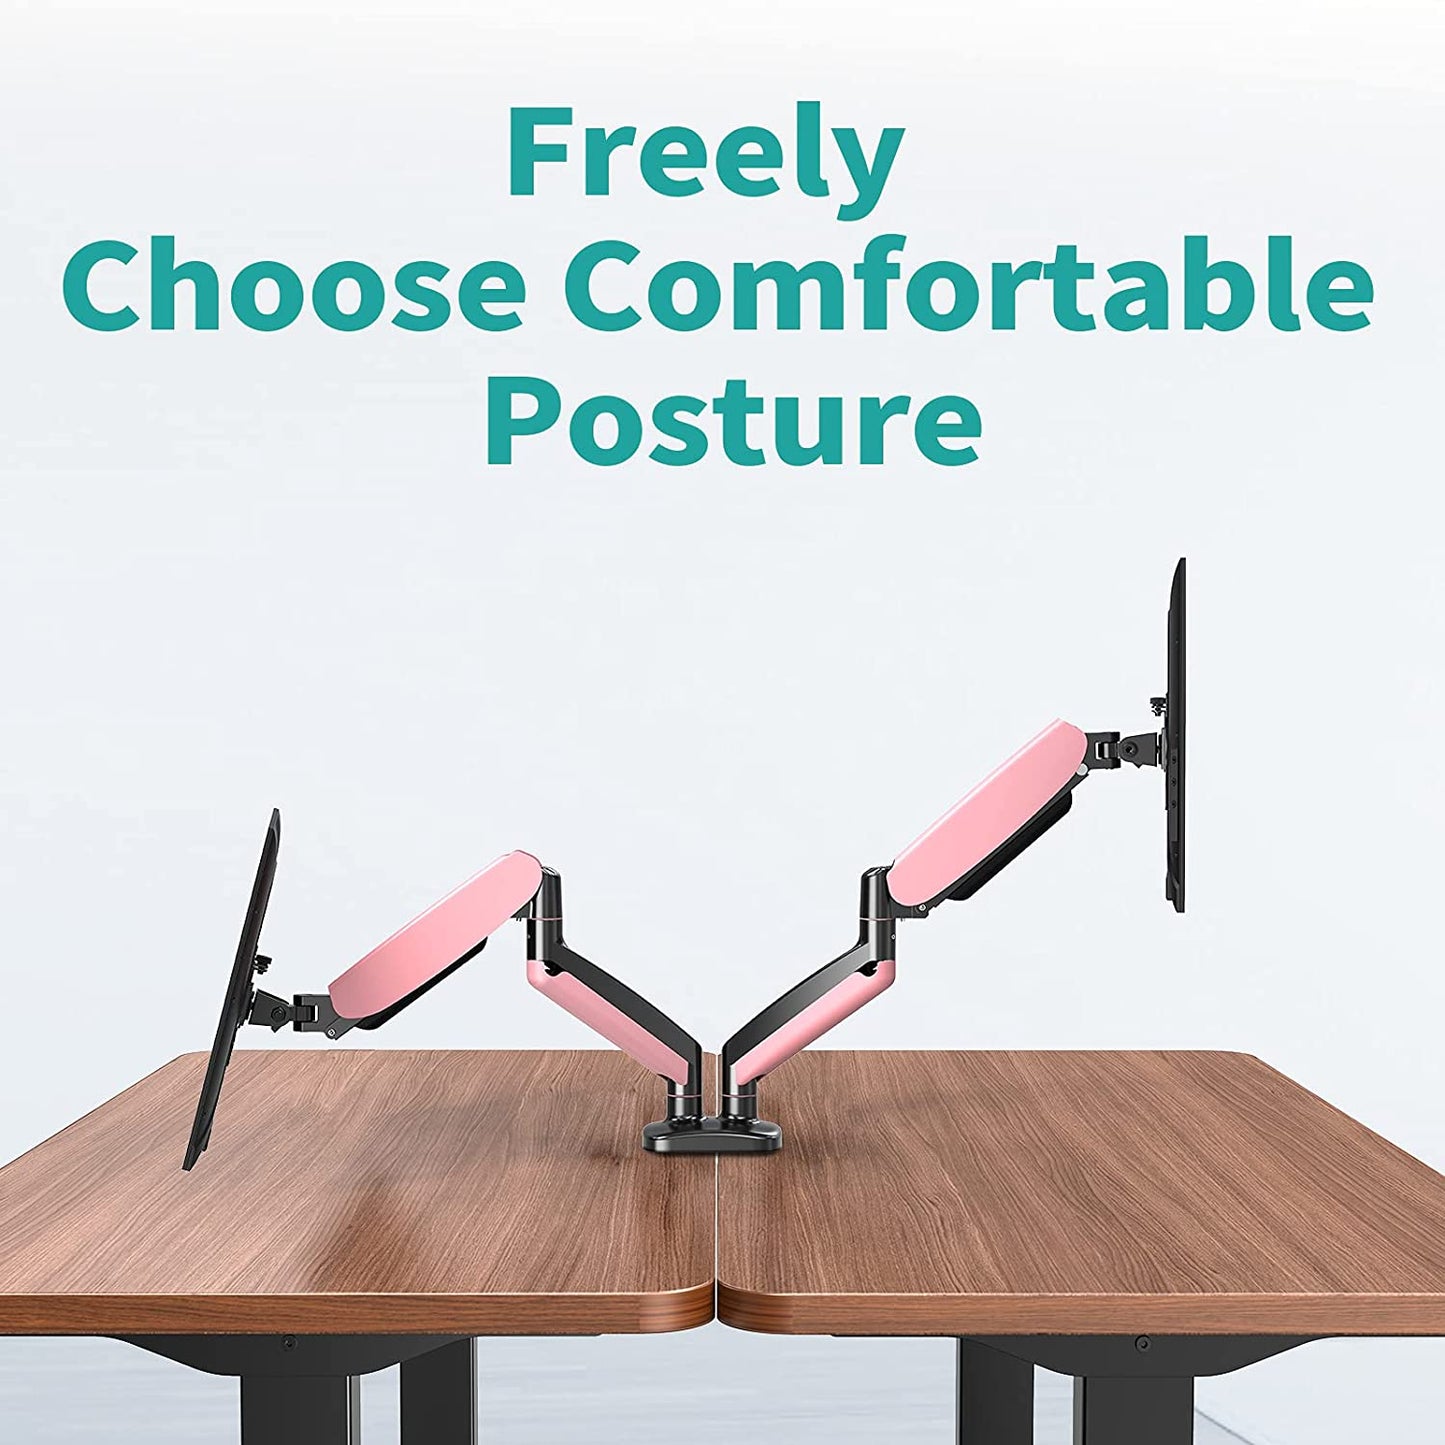 Dual Arms monitor holder freely choose an ergonomics and comfortable posture